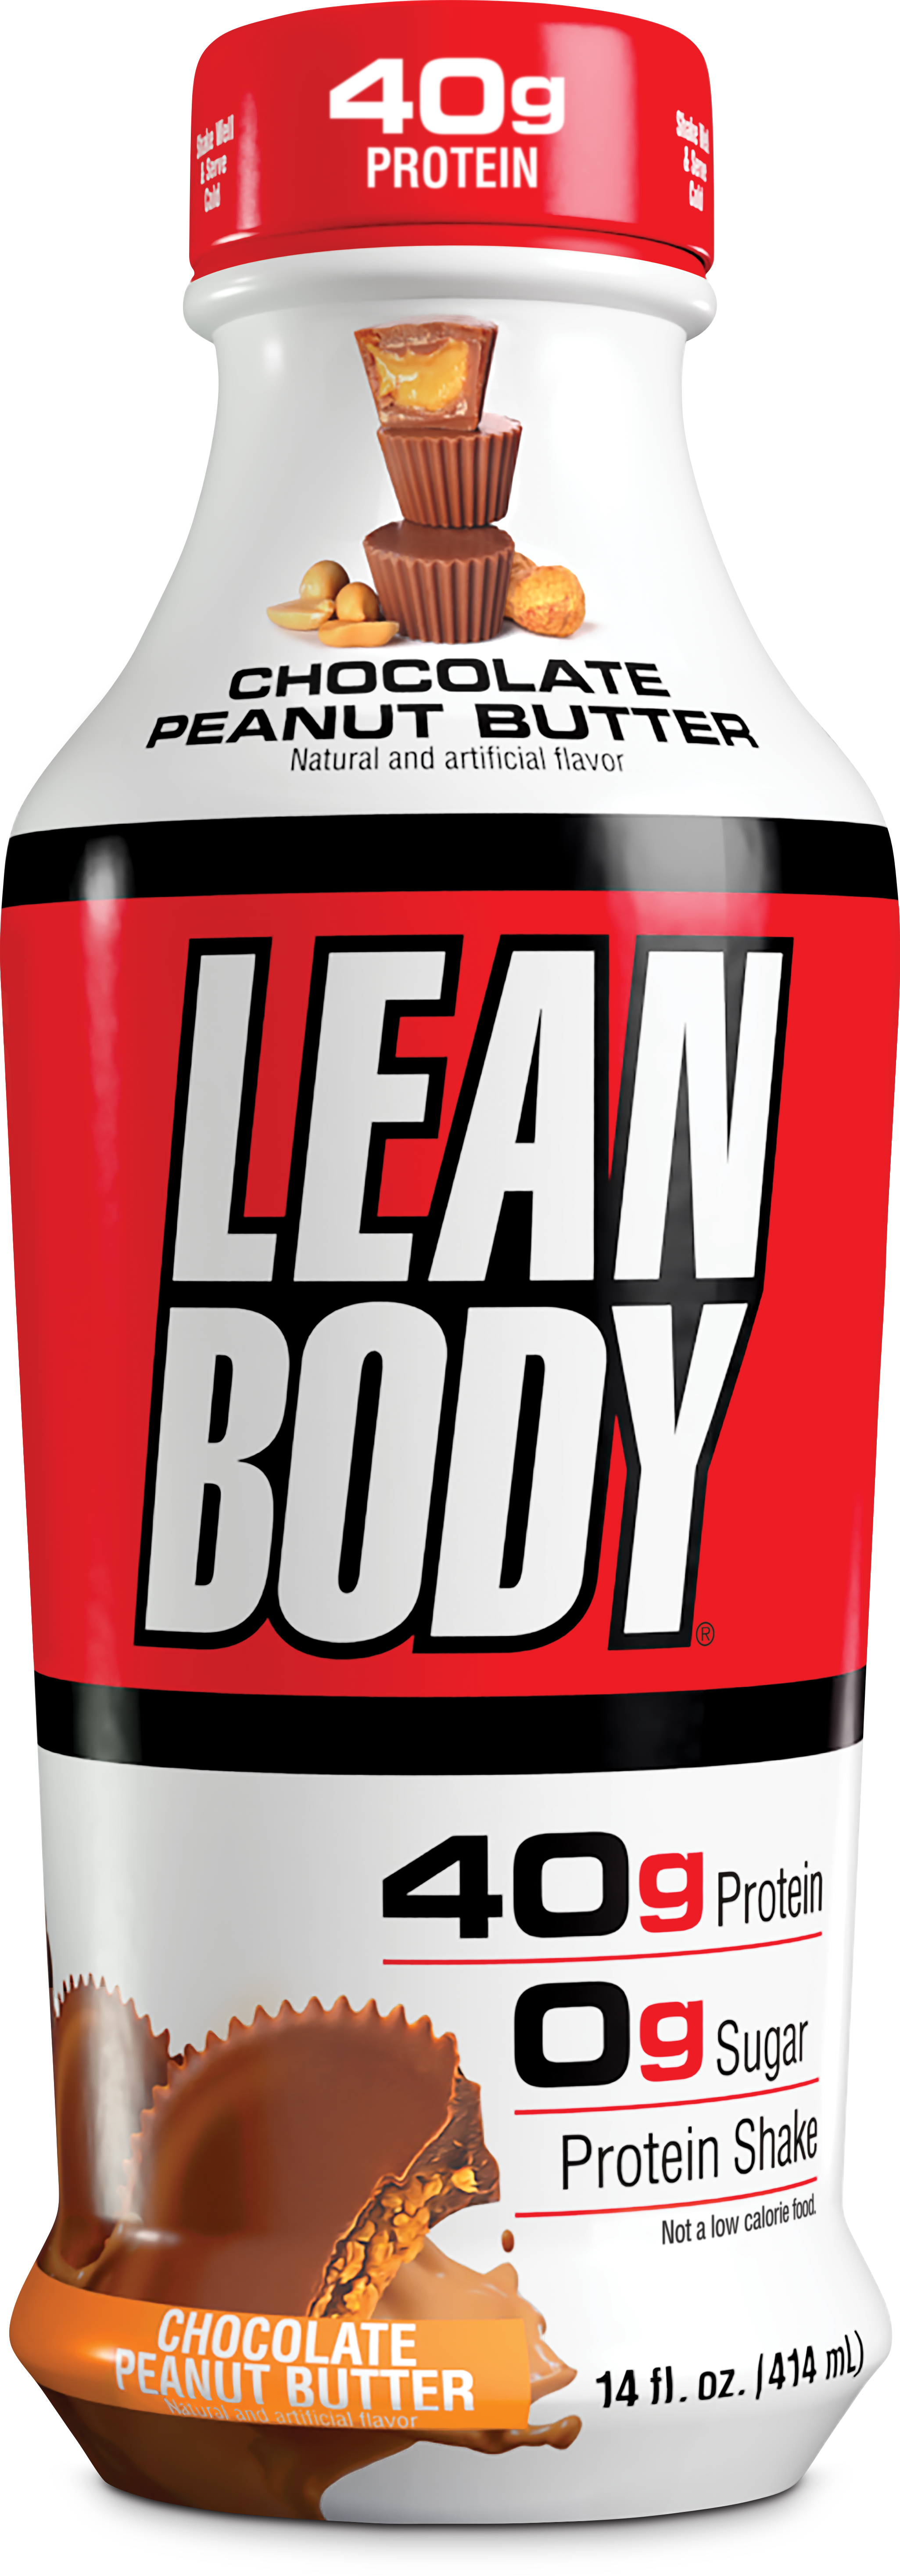 LeanBody protein shake bottle in chocolate peanut butter flavor, a Honickman Companies product of the New York Pepsi location